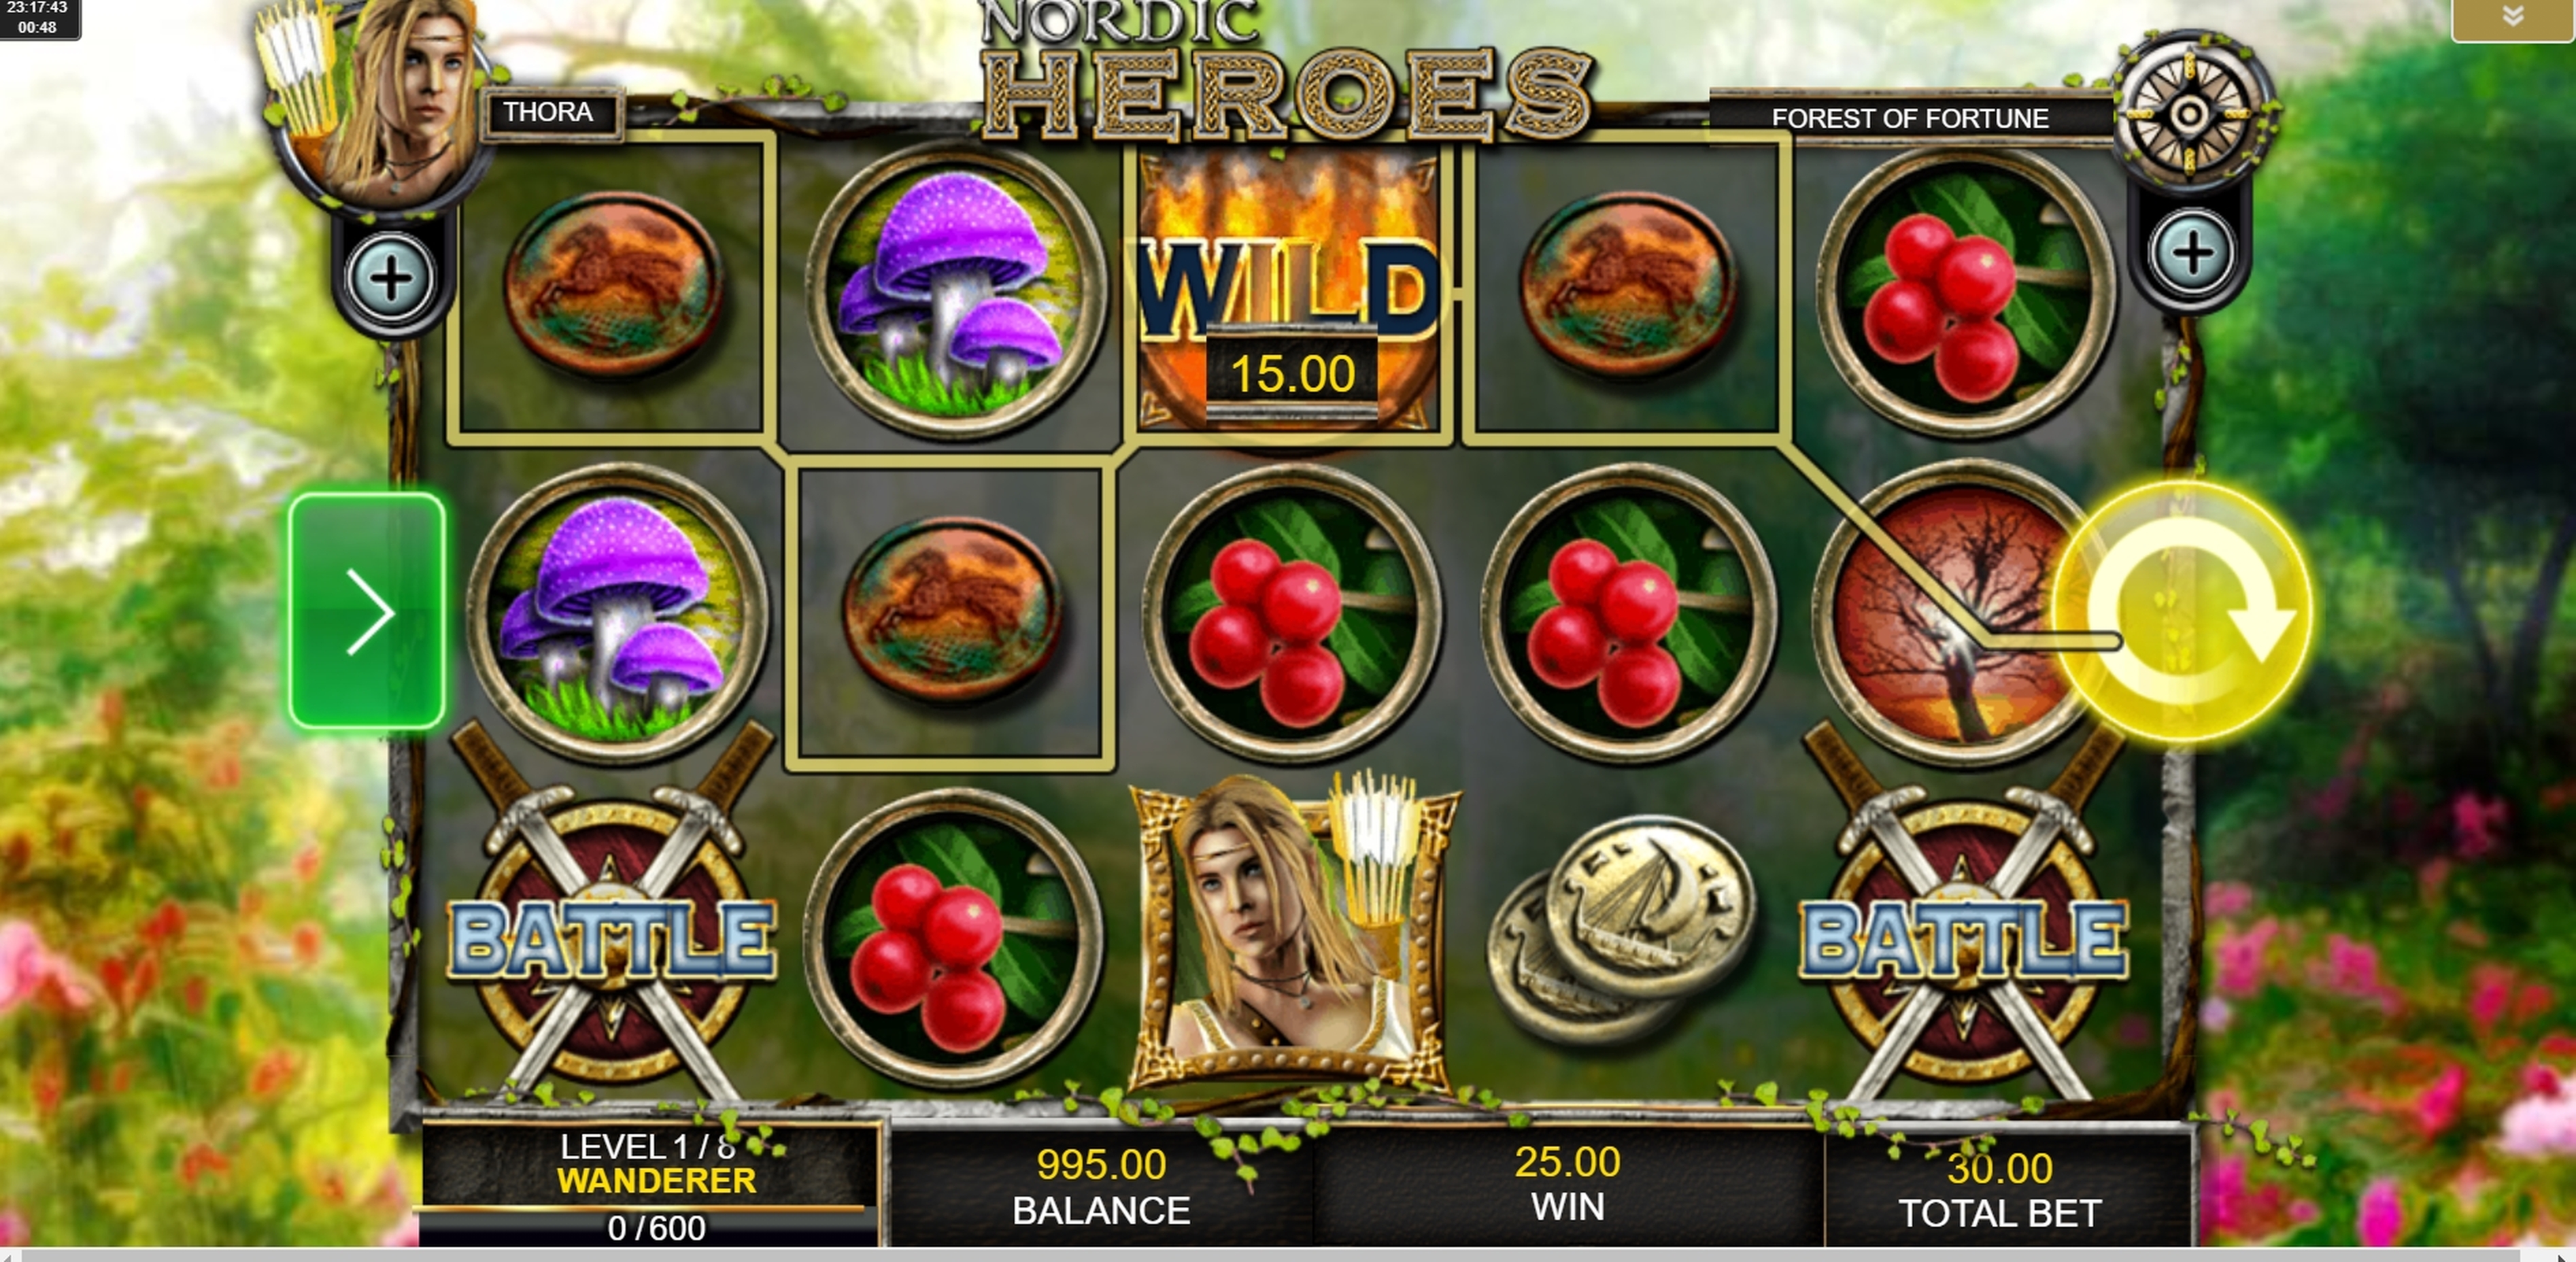 Win Money in Nordic Heroes Free Slot Game by IGT